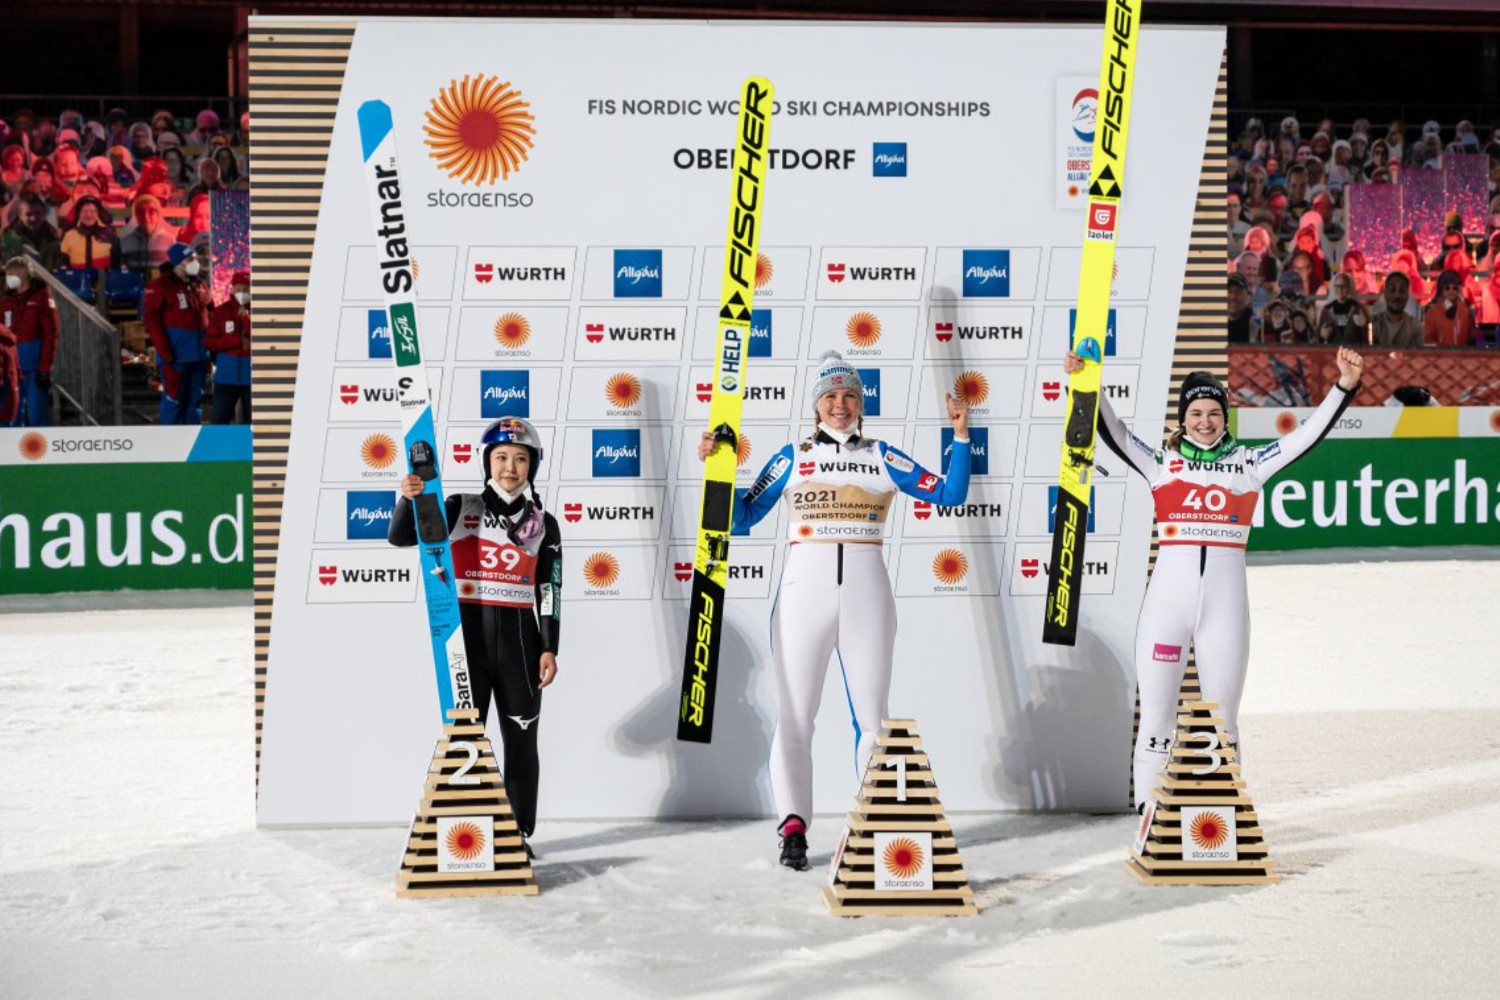 Marine Lundby is the first Big Hills world champion in history